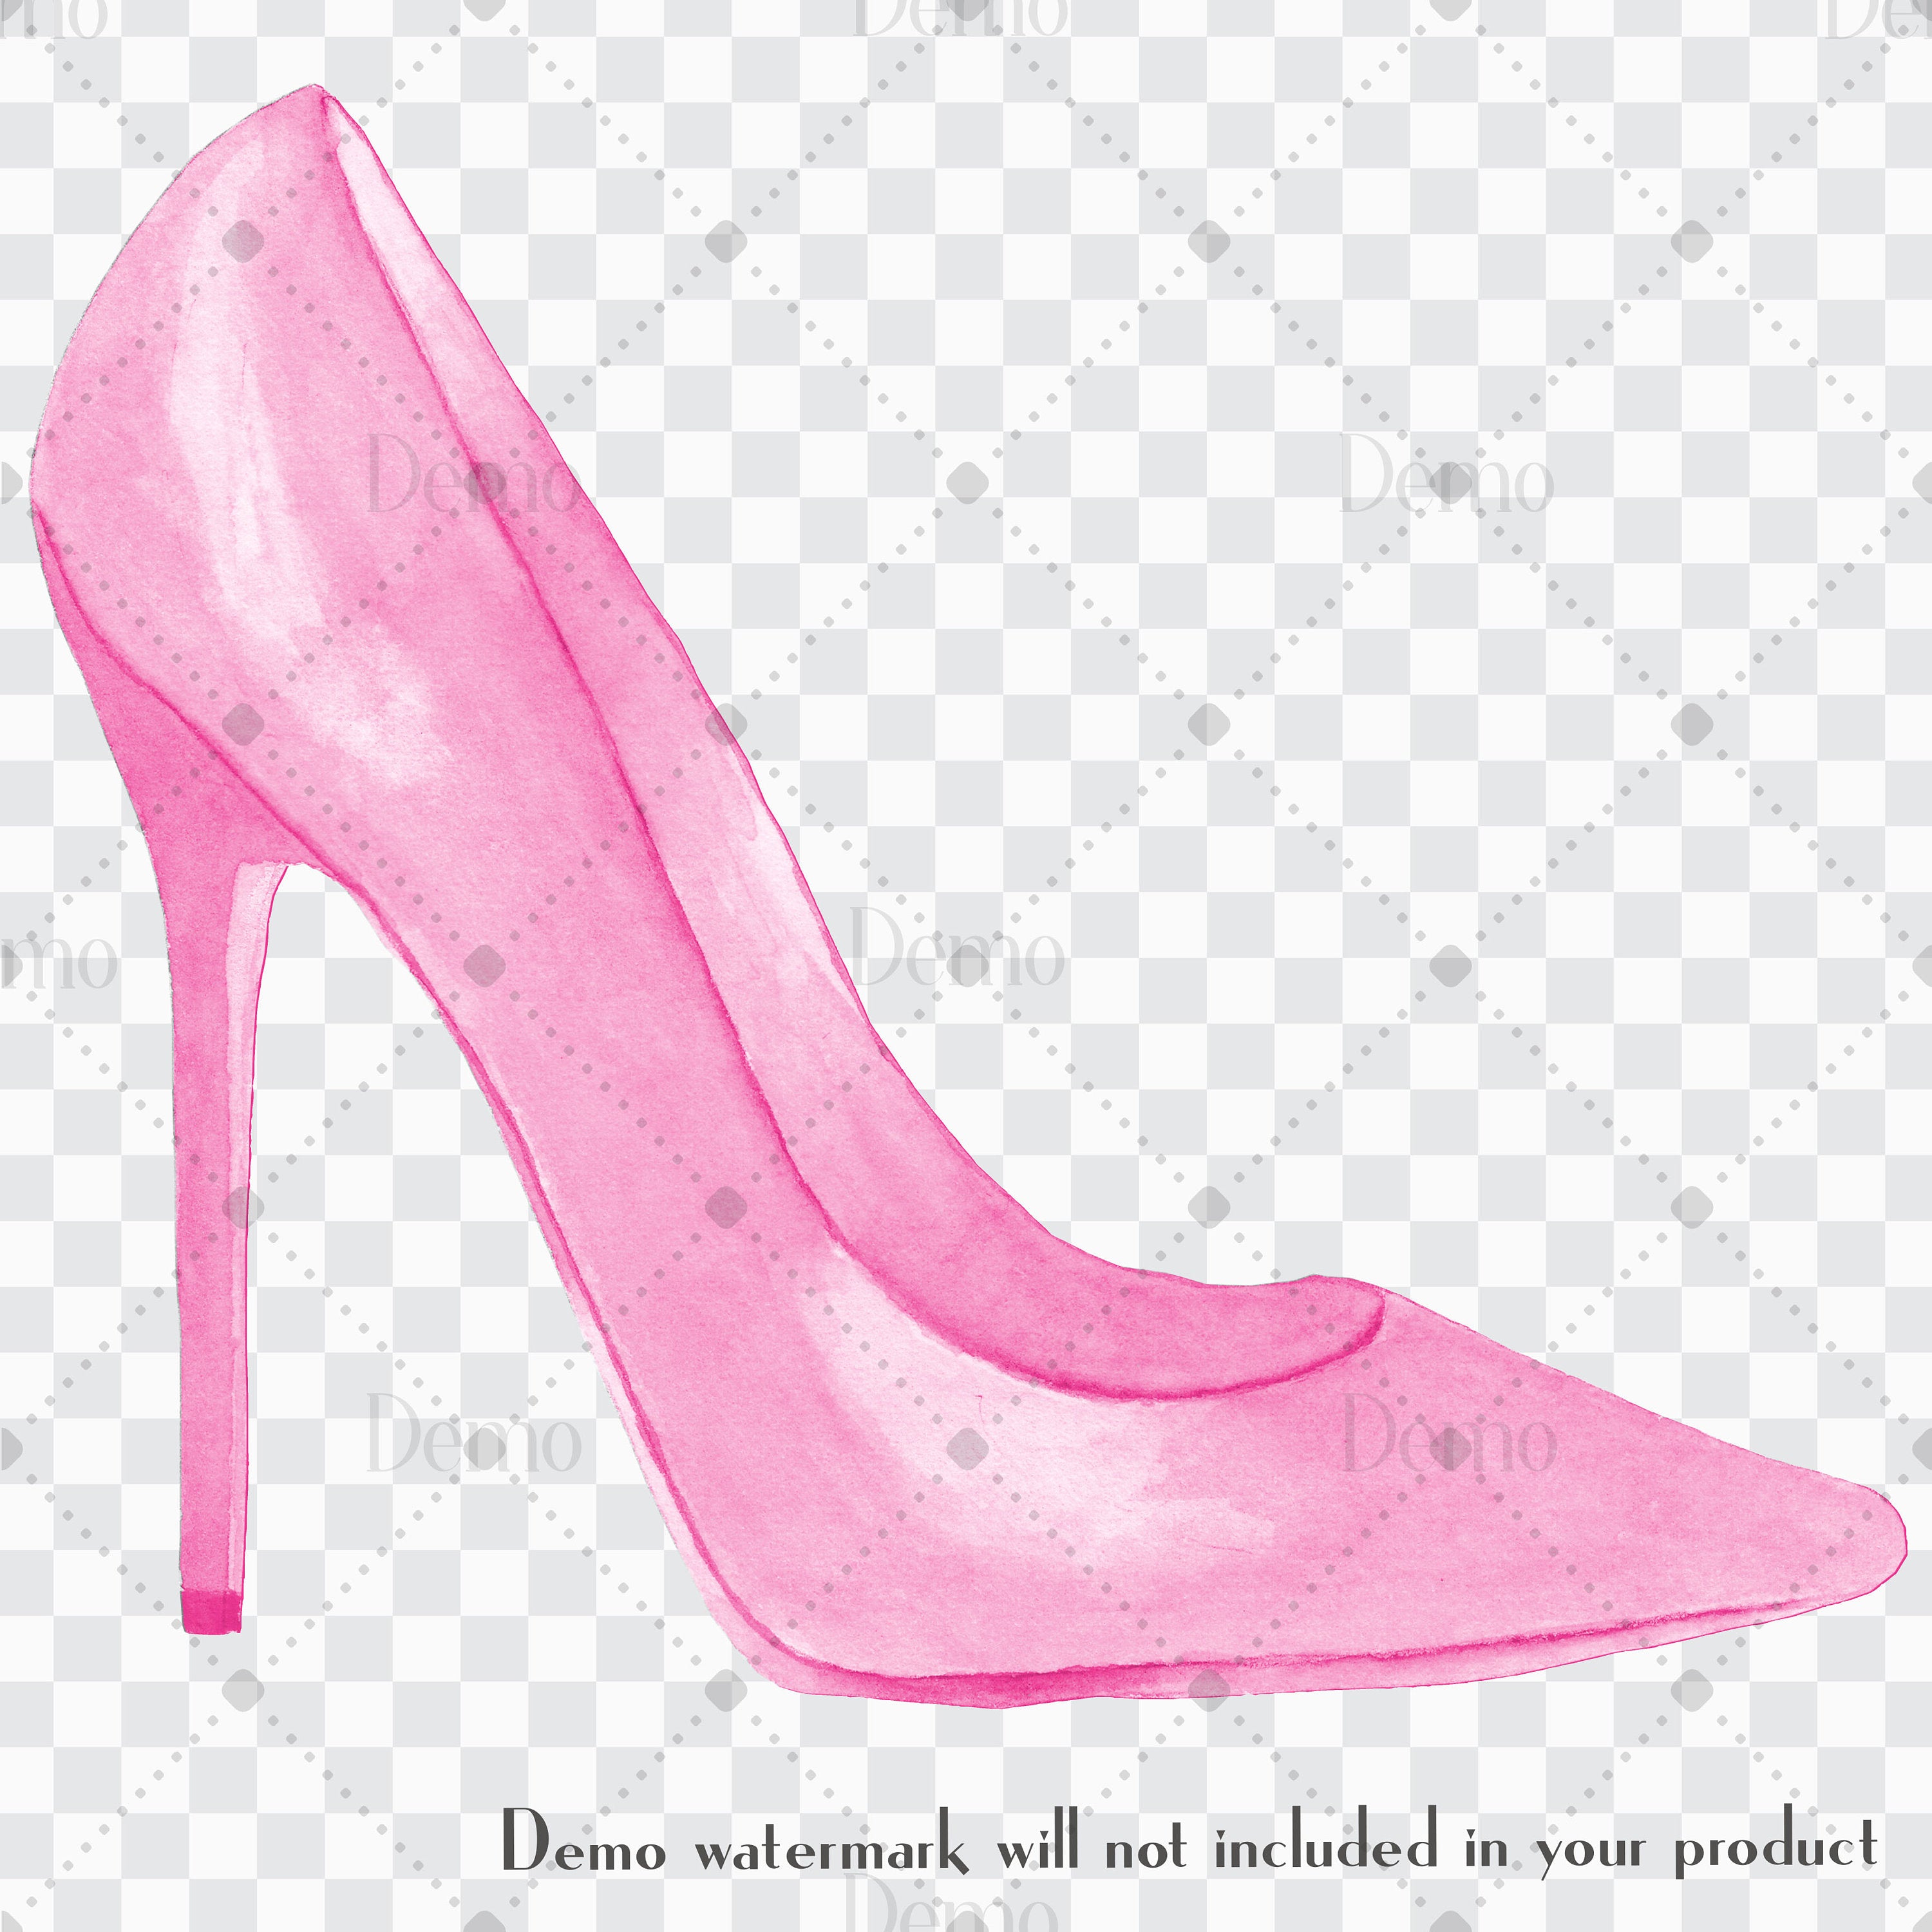 100 Hand Painted Watercolor Shiny High Heels Cliparts, Scrapbook, Shiny Pumps, Fashion Cliparts, Bridal Shoes, Bridal Shower, Valentine Gift